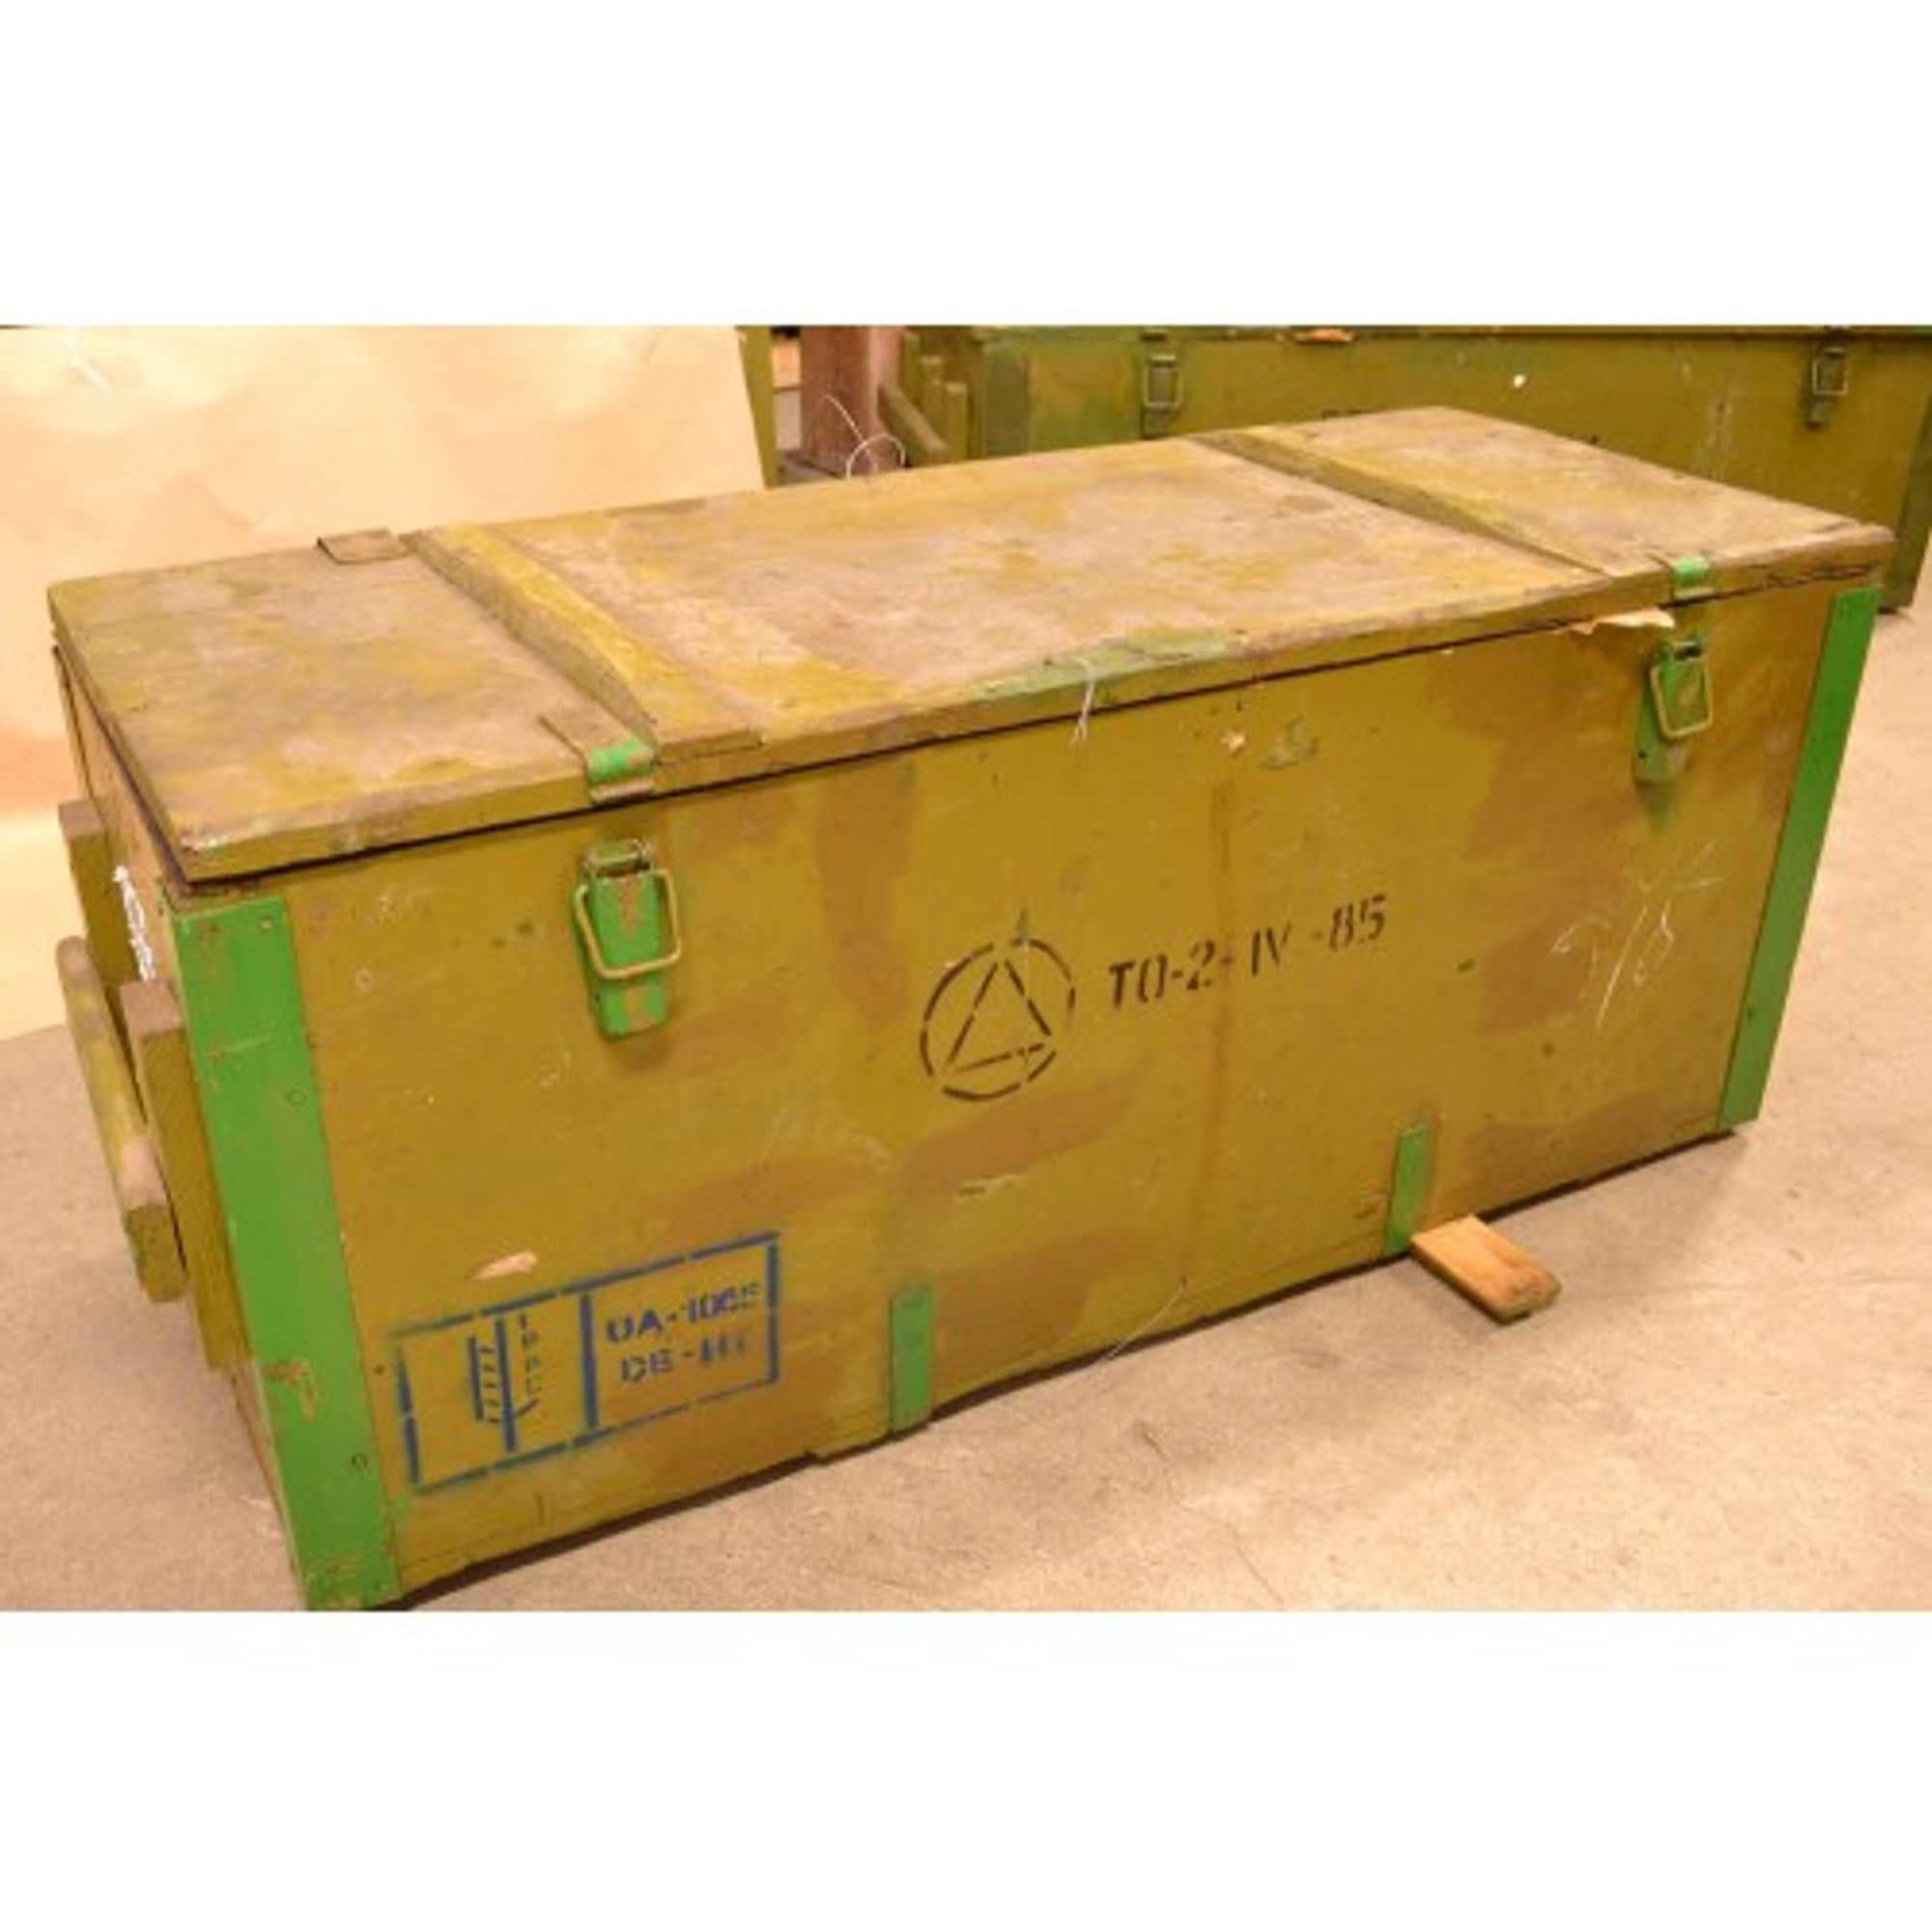 Russian Military Issue Weapons Transportation Crate - Like New